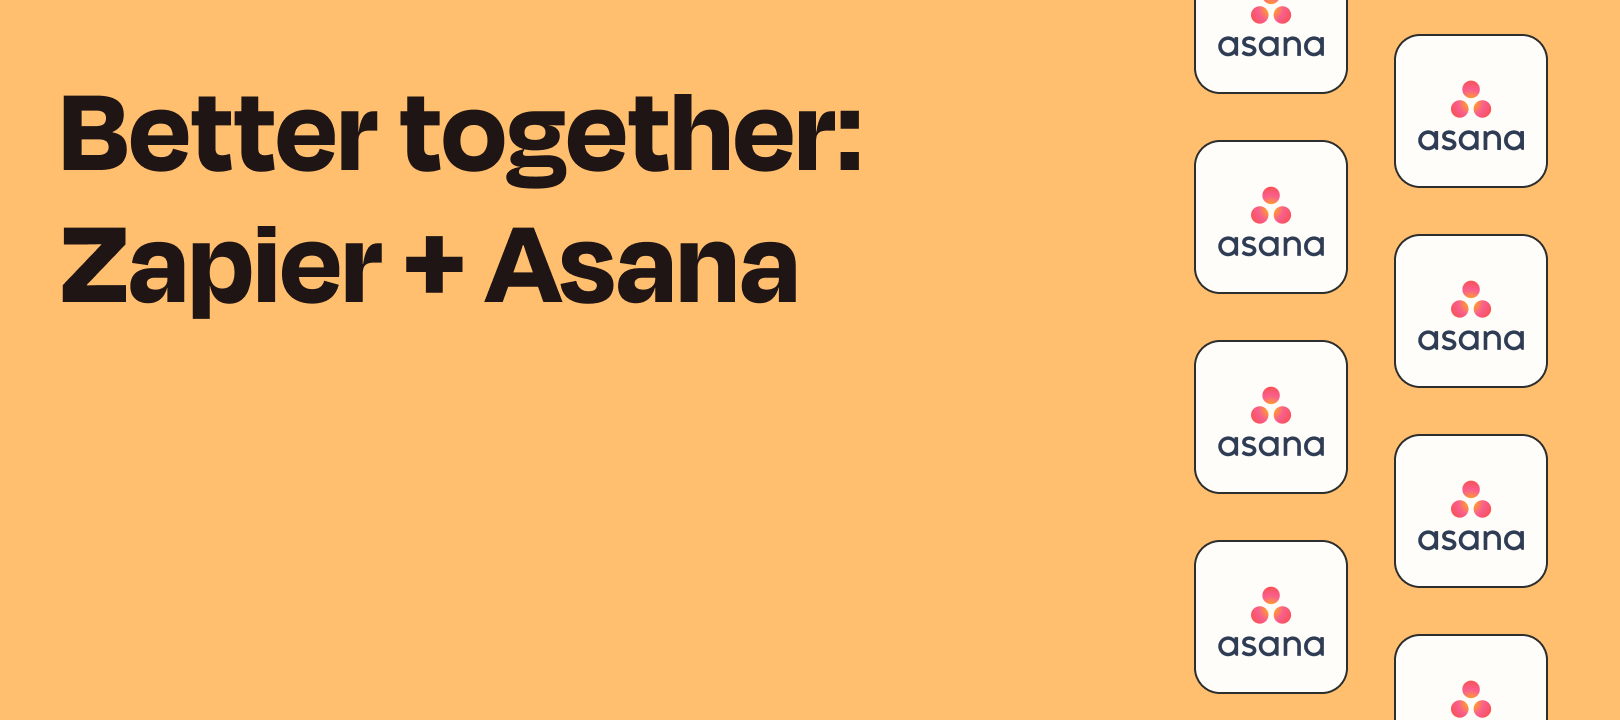 5 ways that Asana and Zapier are better together